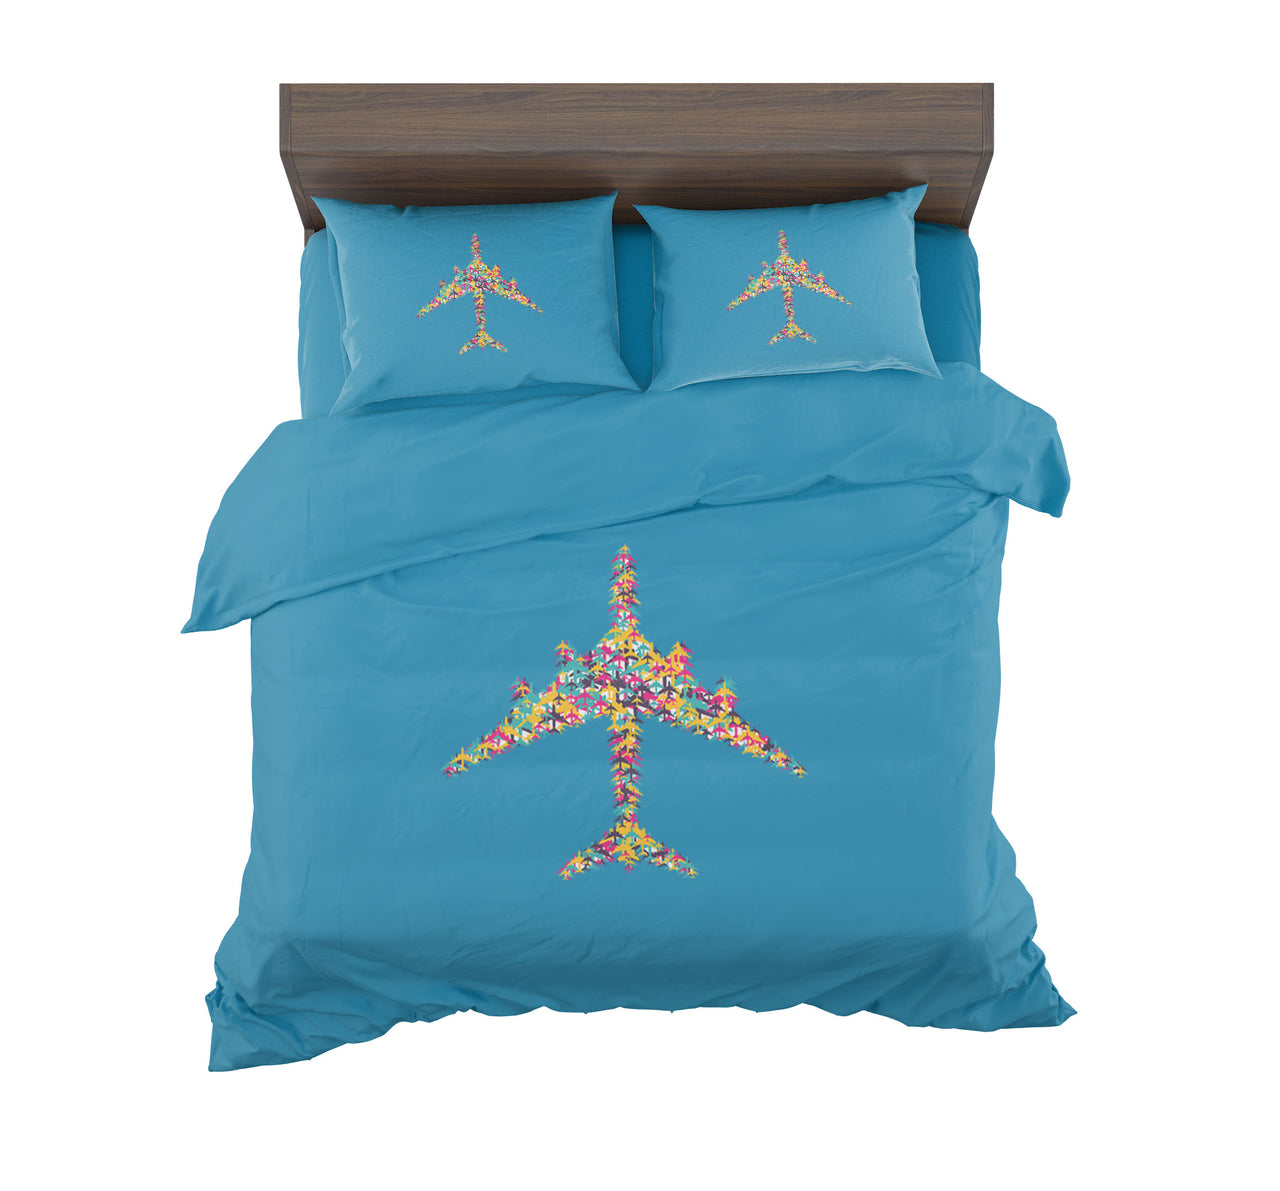 Colourful Airplane Designed Bedding Sets